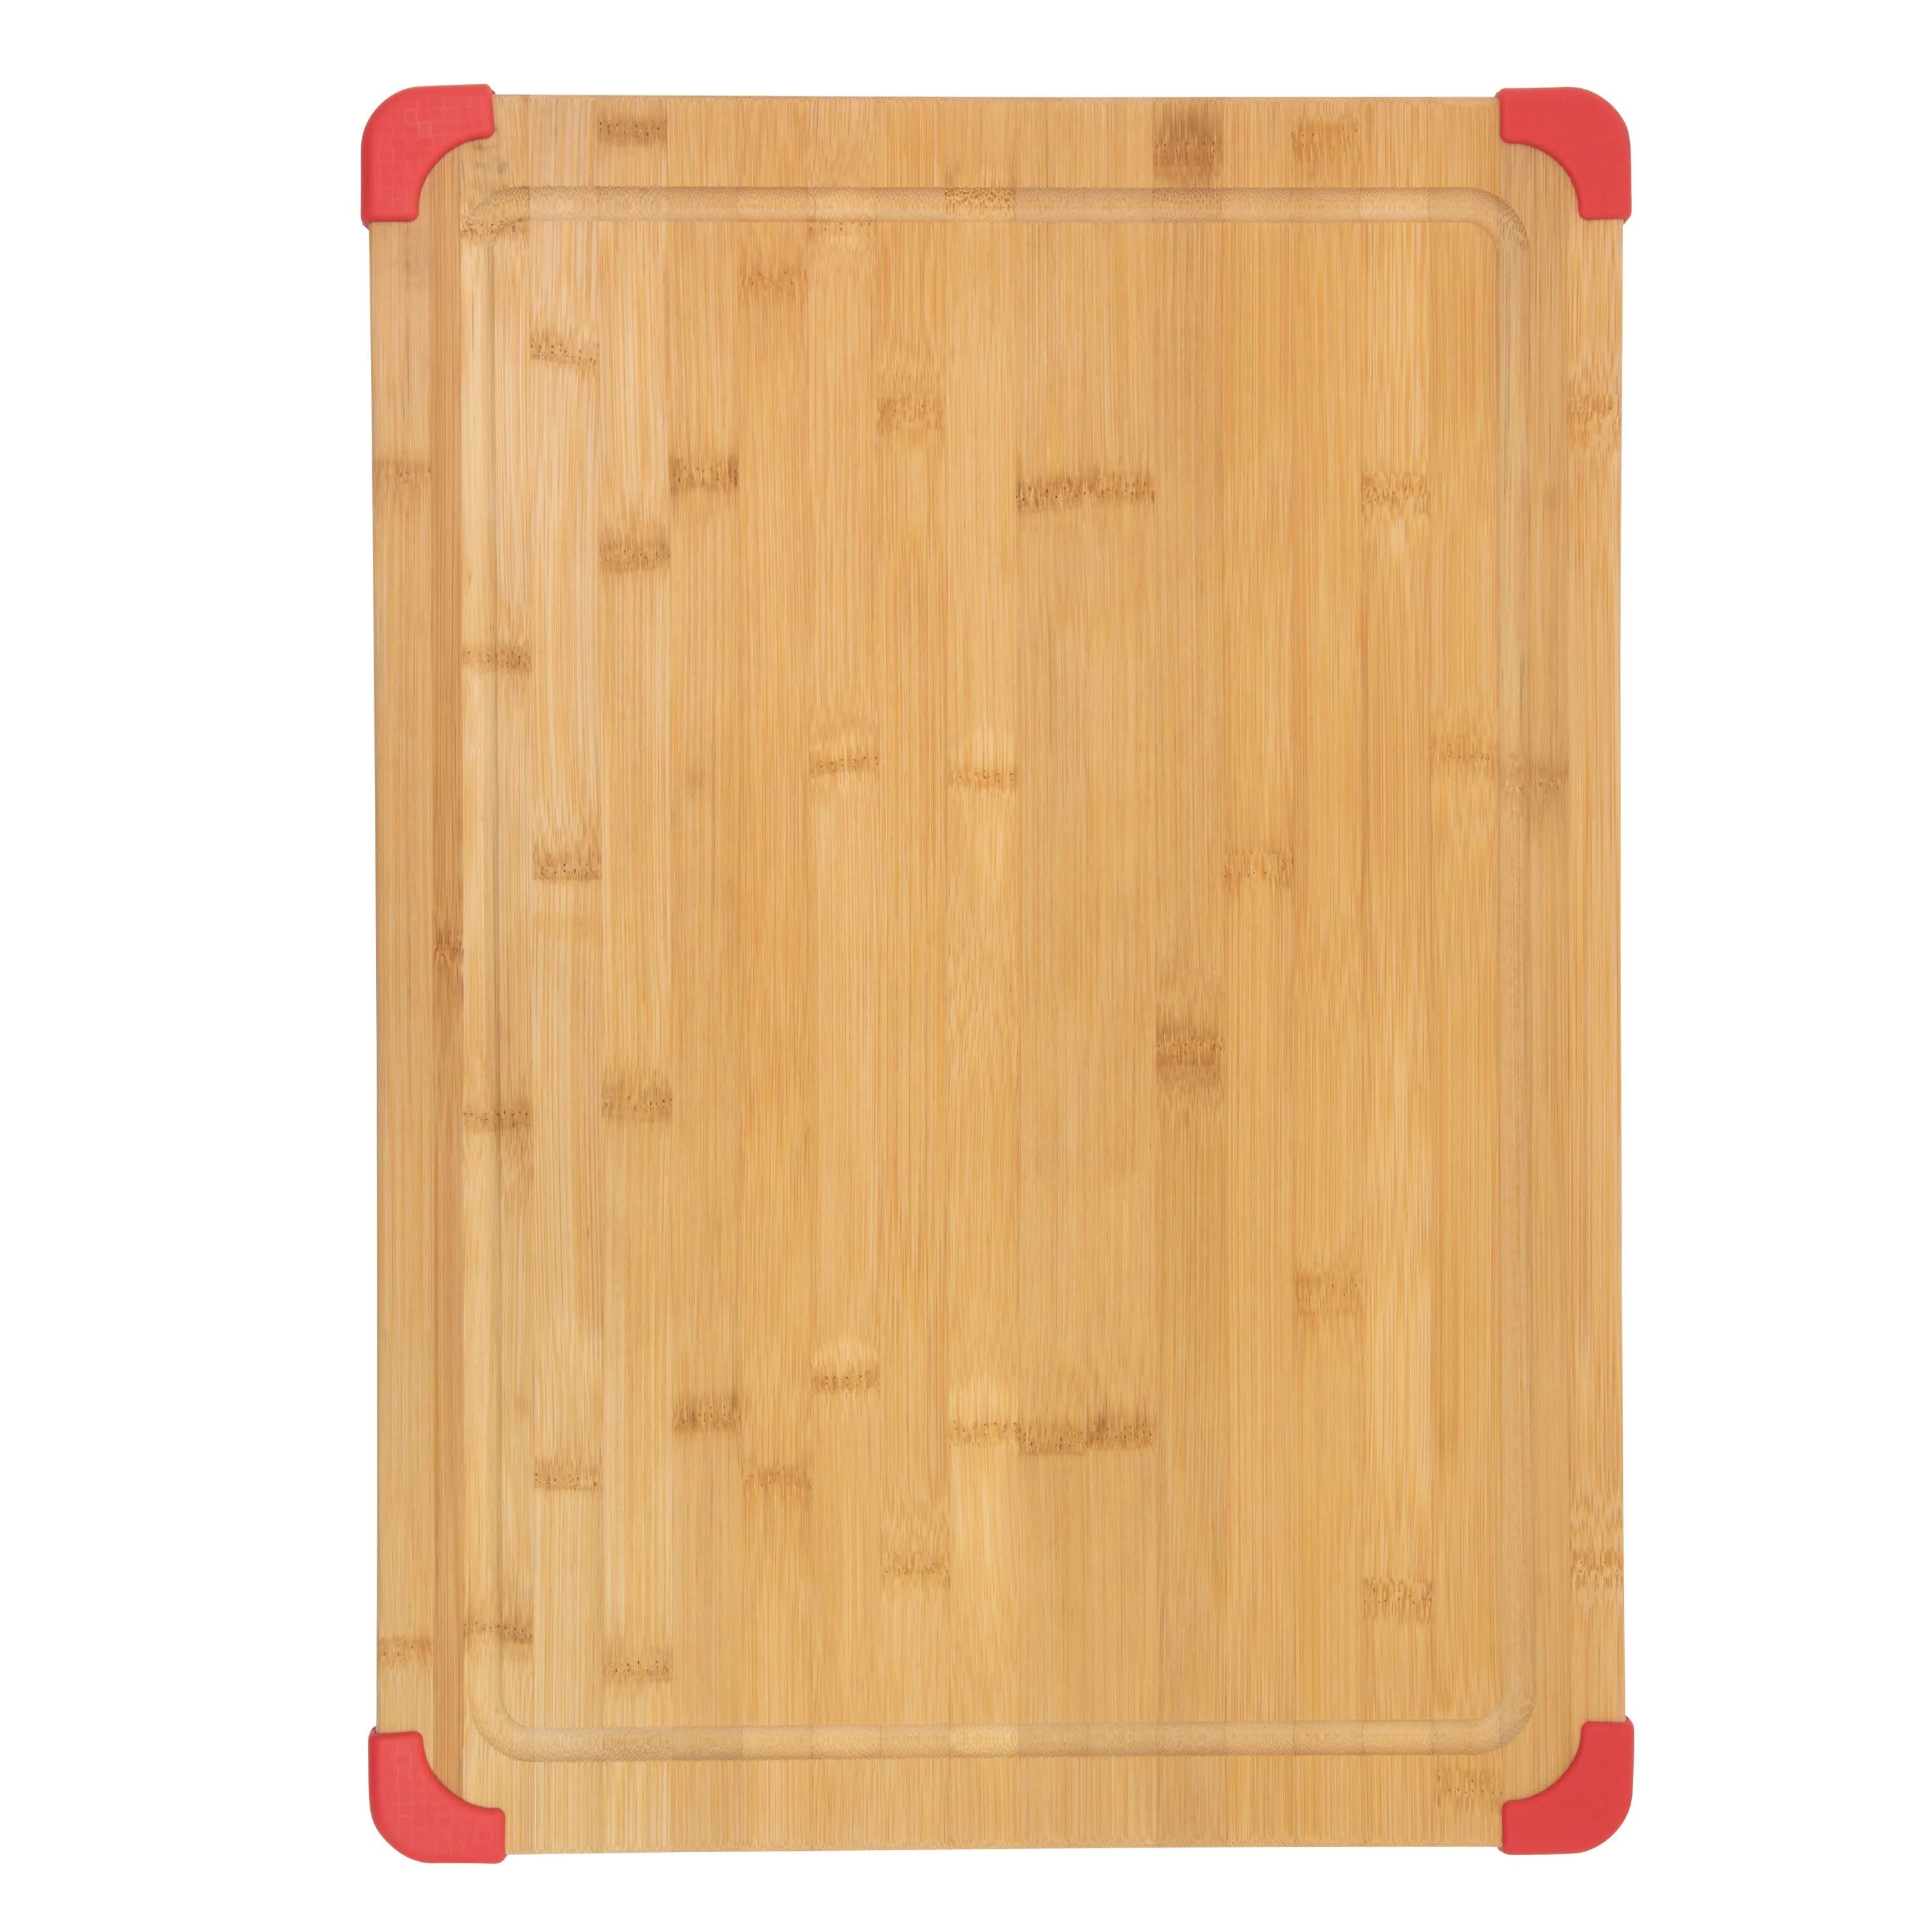 Farberware 15-inch by 21-inch Bamboo Wood Cutting Board with Red Non-slip Corners | Walmart (US)